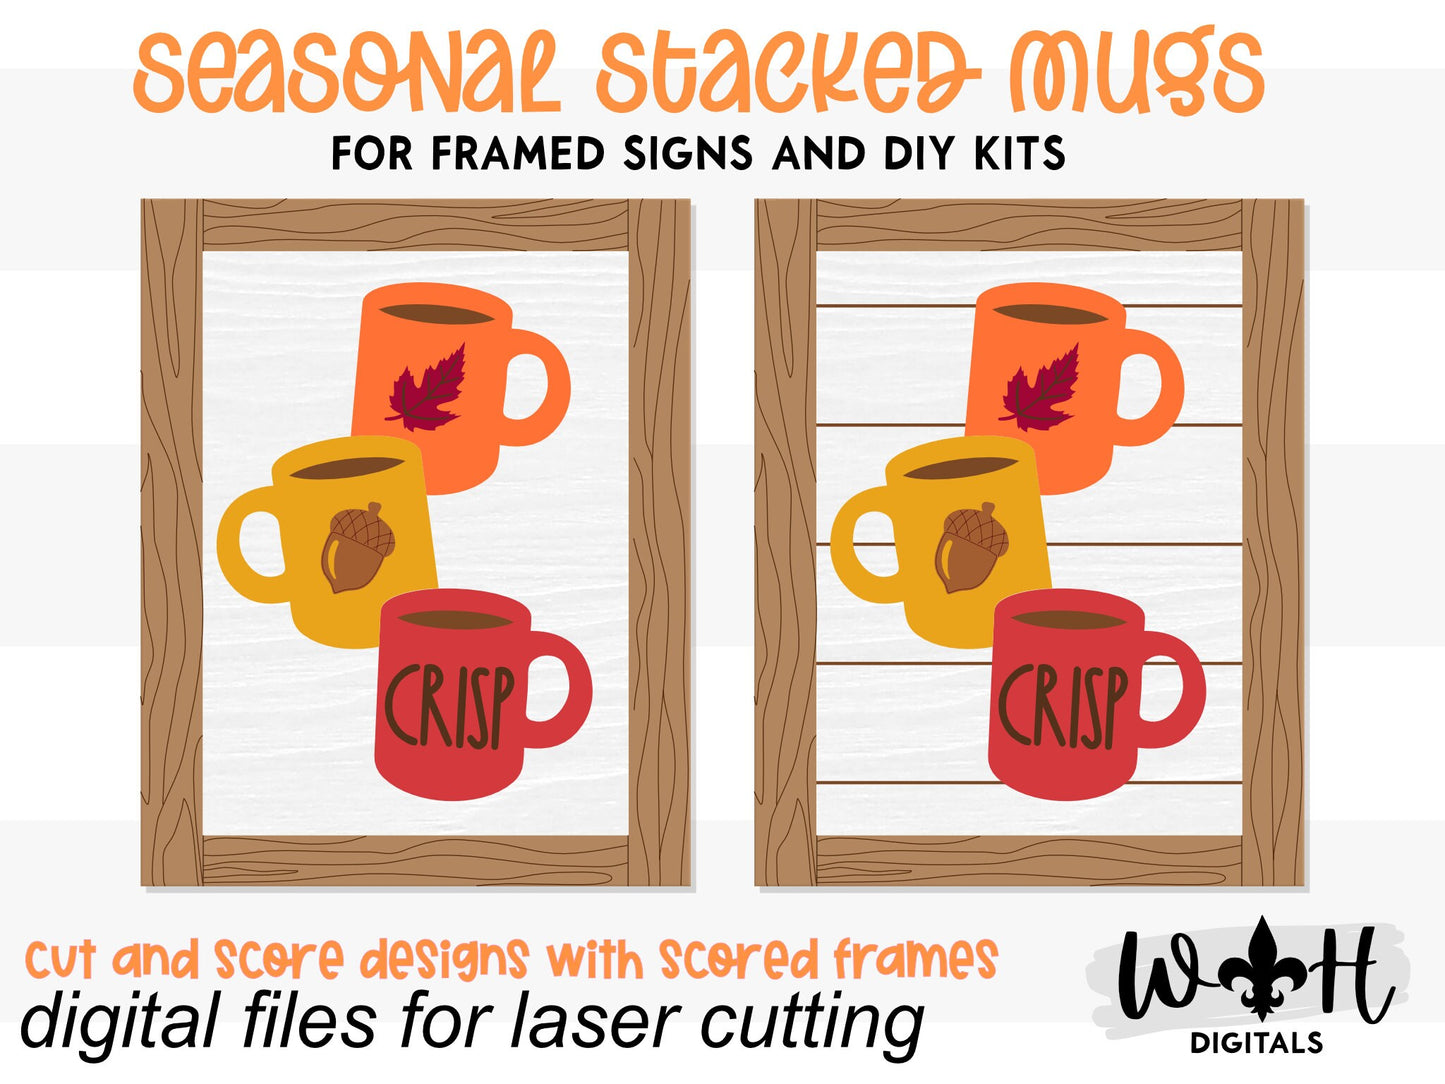 Crisp Stacked Coffee Mugs Farmhouse Frame Sign - Autumn Tiered Tray Decor and DIY Kits - Cut File For Glowforge Lasers - Digital SVG File